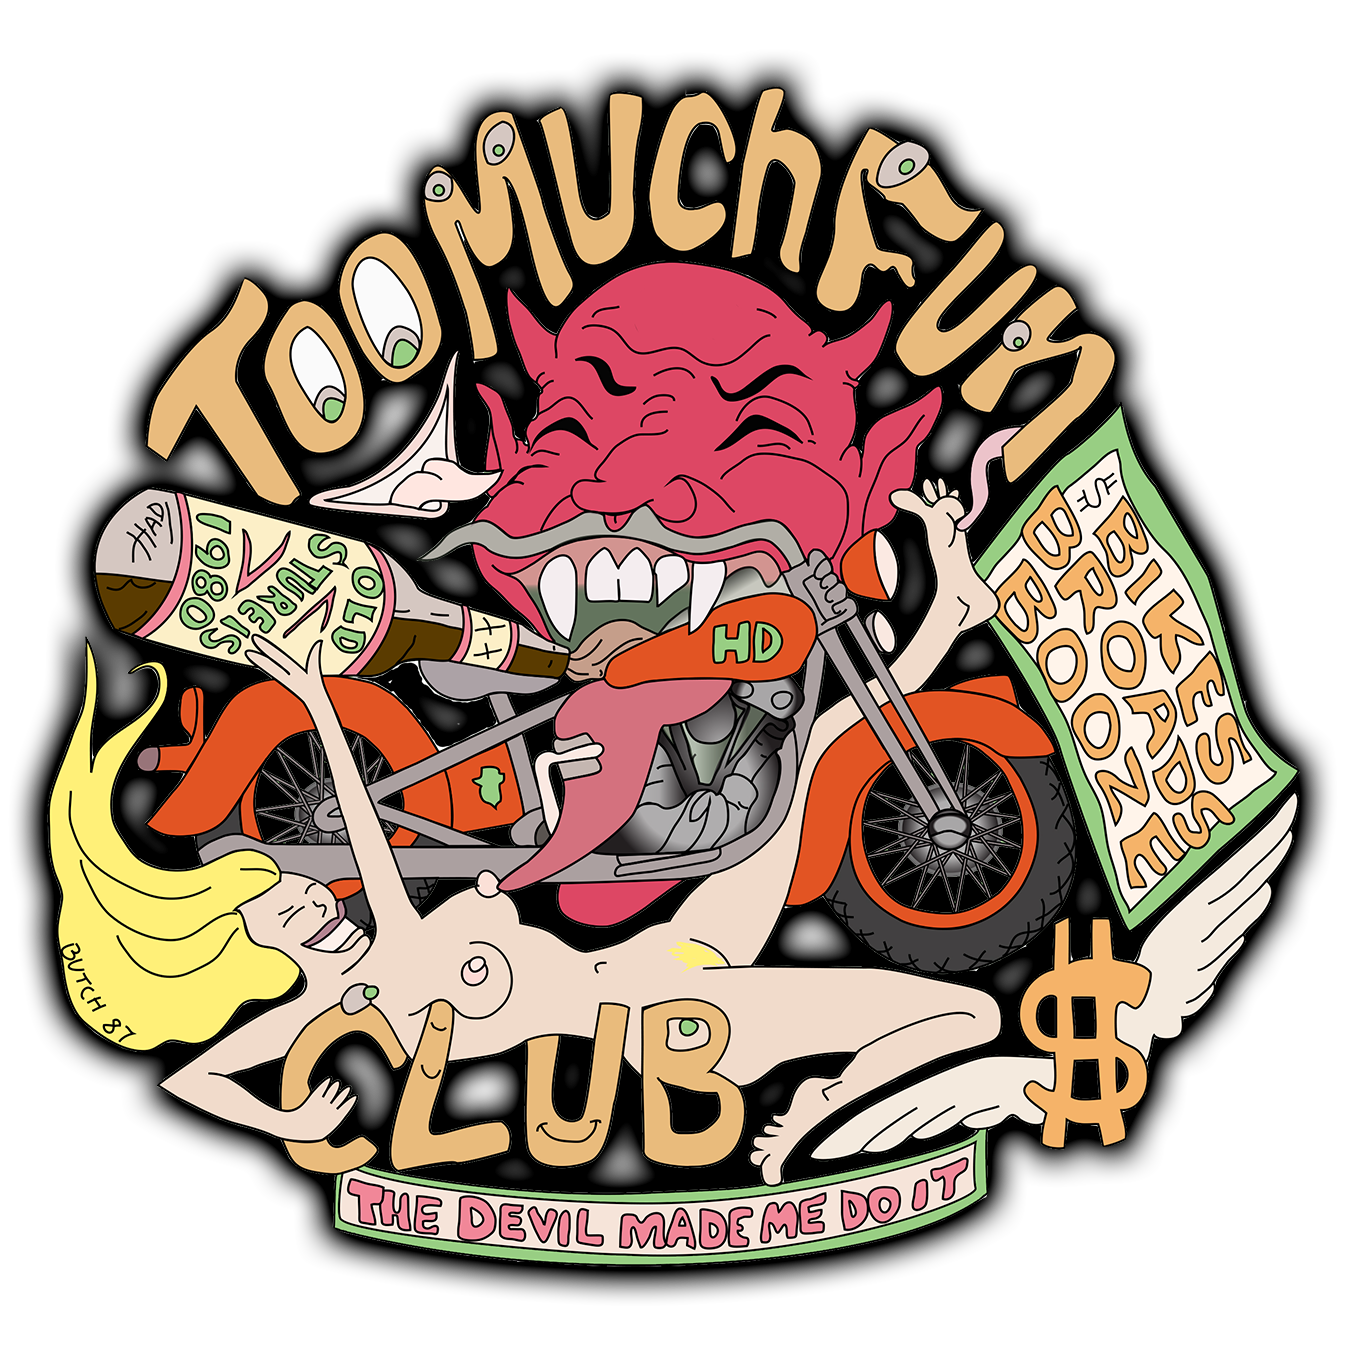 About Too Much Fun Club